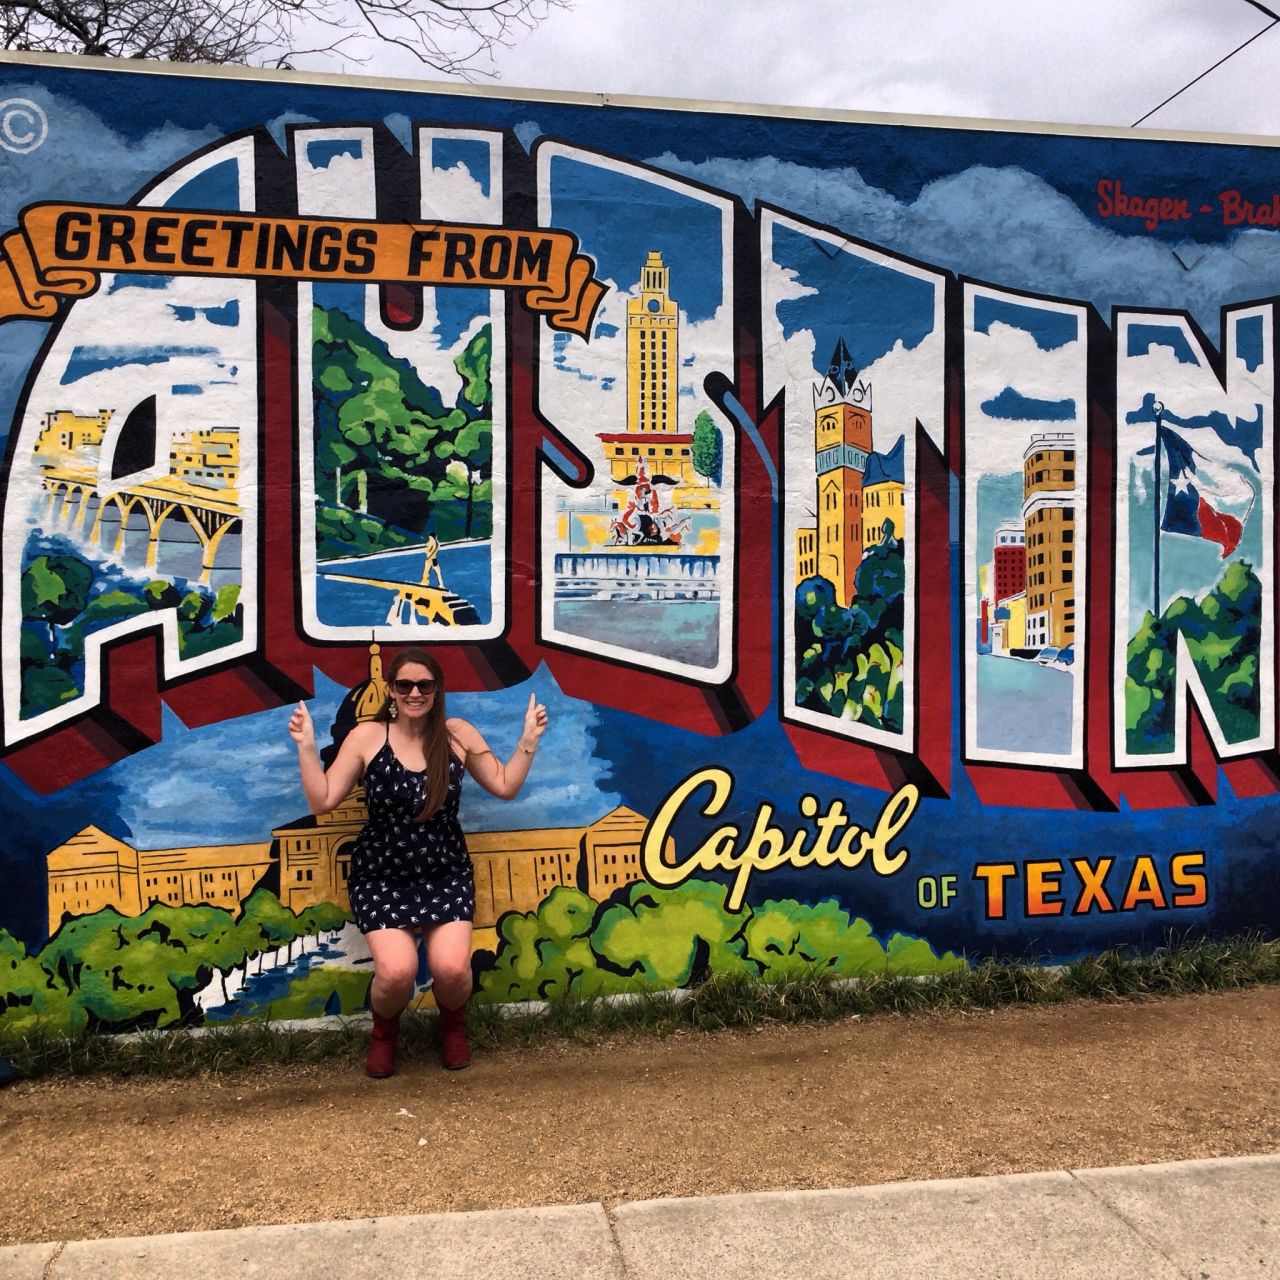 <a href="http://ireport.cnn.com/docs/DOC-1131781">Taylor Harkins</a> says the key to visiting a lot of states is to find time to take short trips and make the most of them. "You spend so much time wasting time," she says. "When you think about that hour you spend watching TV, you could have taken a trip somewhere." 